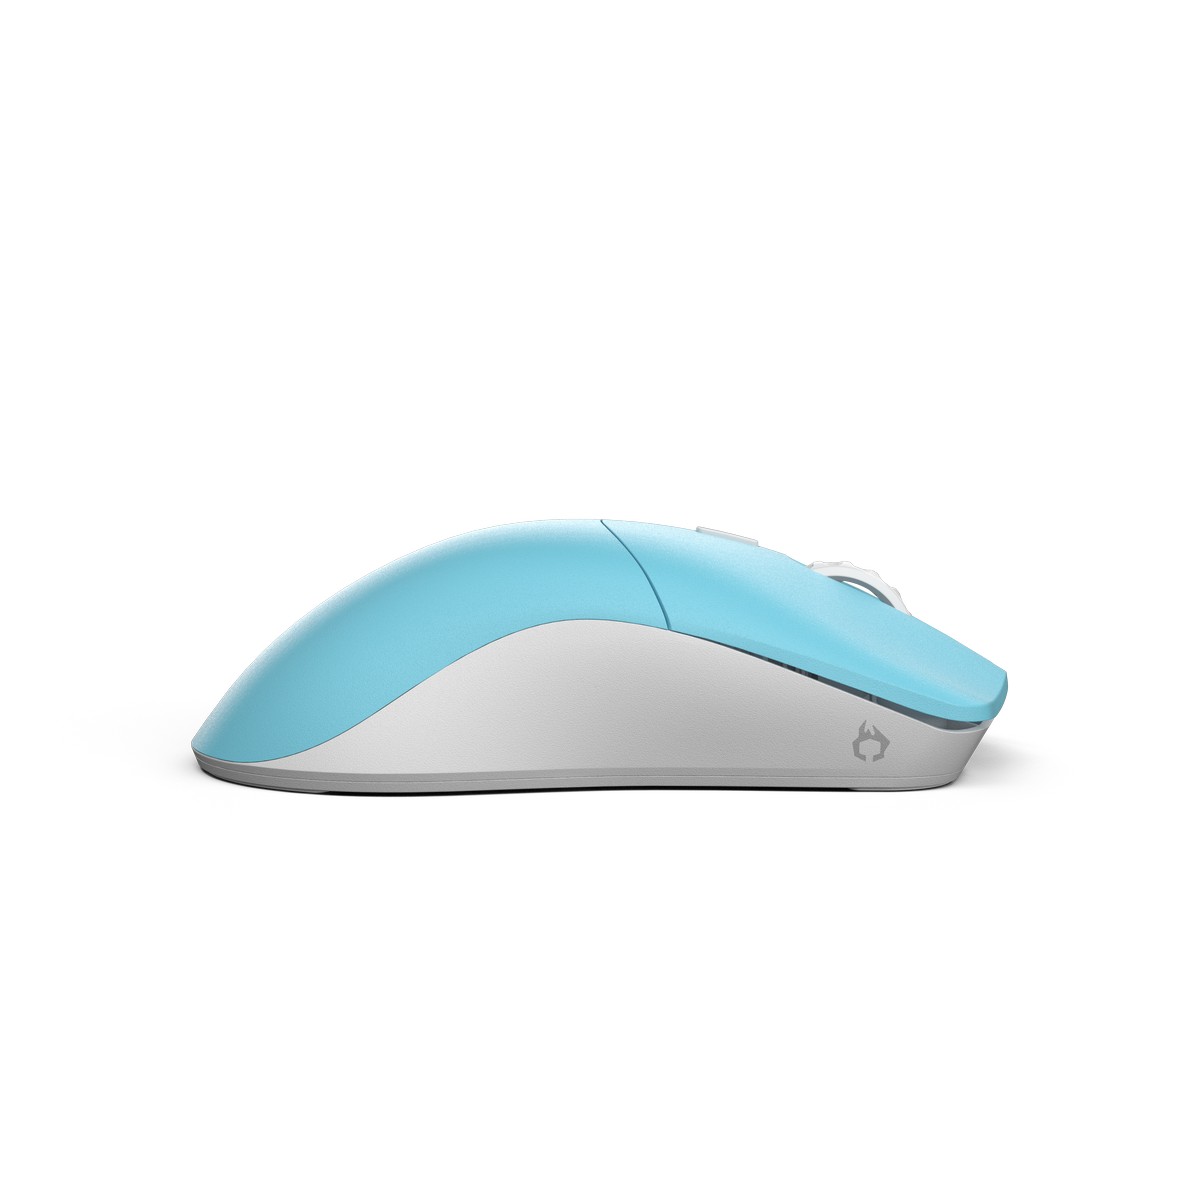 Glorious Model O PRO Wireless Optical Gaming Mouse - Blue Lynx ...